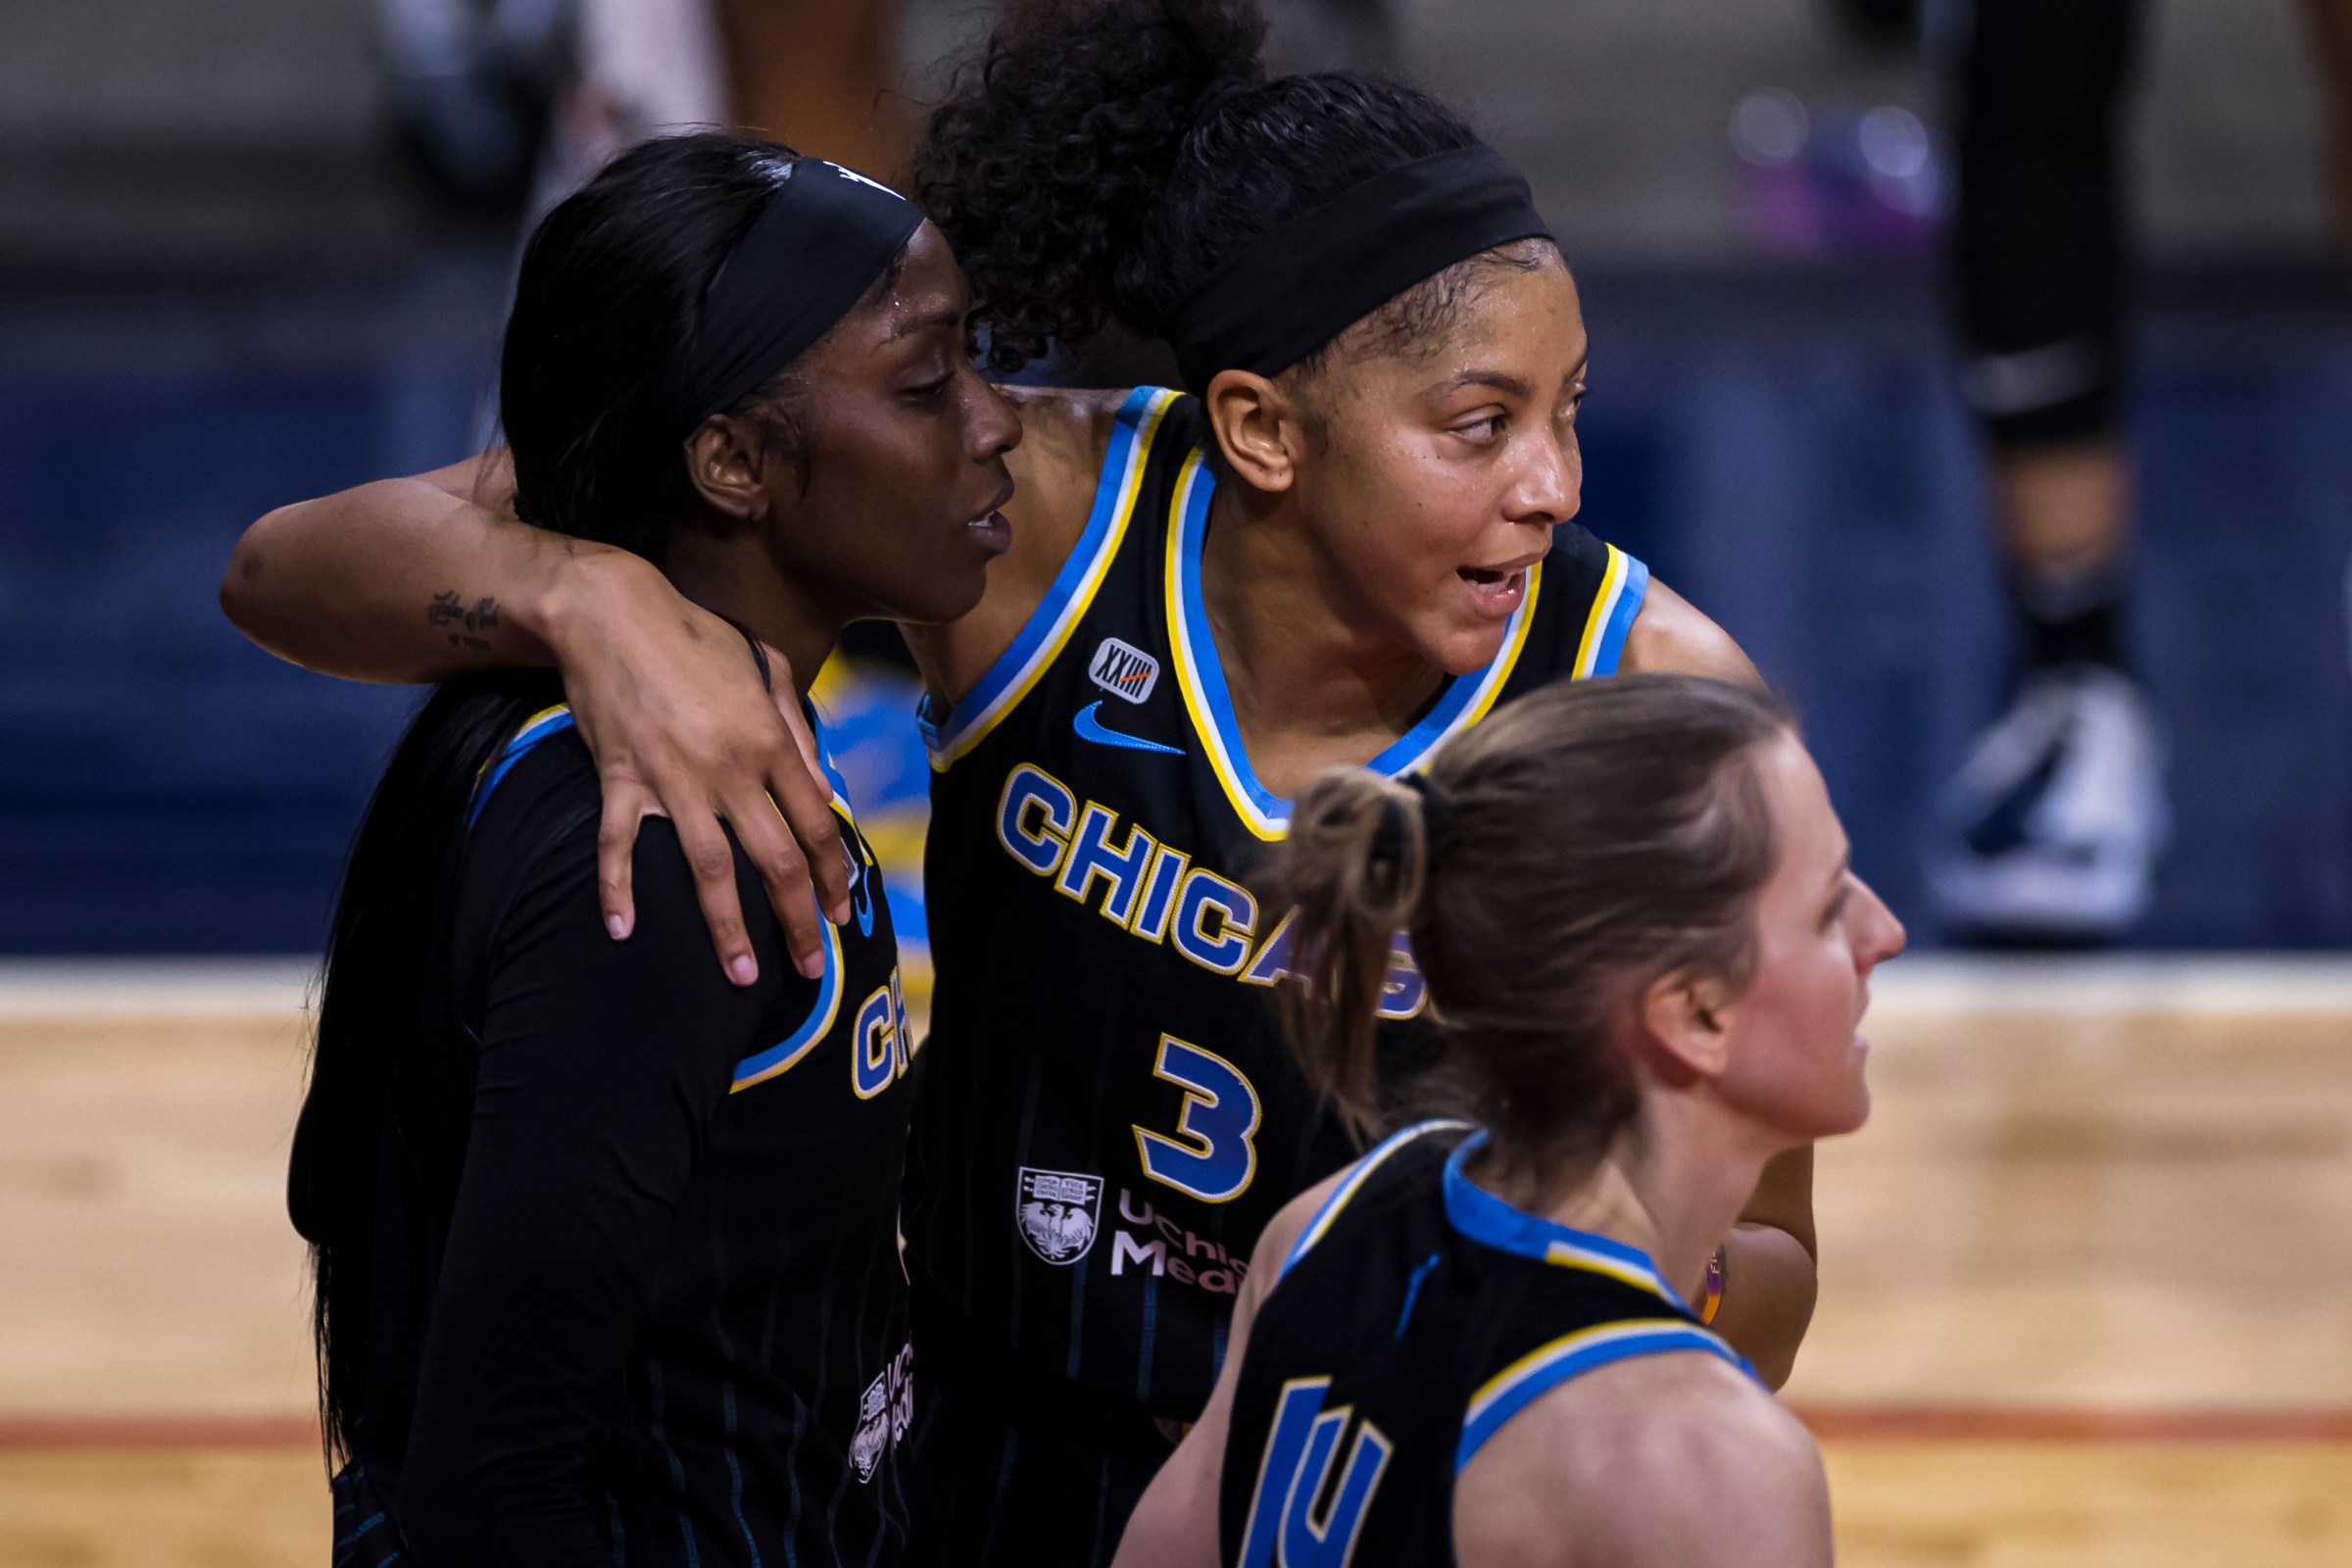 Candace Parker #3 of the Chicago Sky huddles with teammates Kahleah Copper #2 and Allie Quigley #14 during the first half of the game against the Washington Mystics at Entertainment &amp; Sports Arena on May 15, 2021 in Washington, DC.